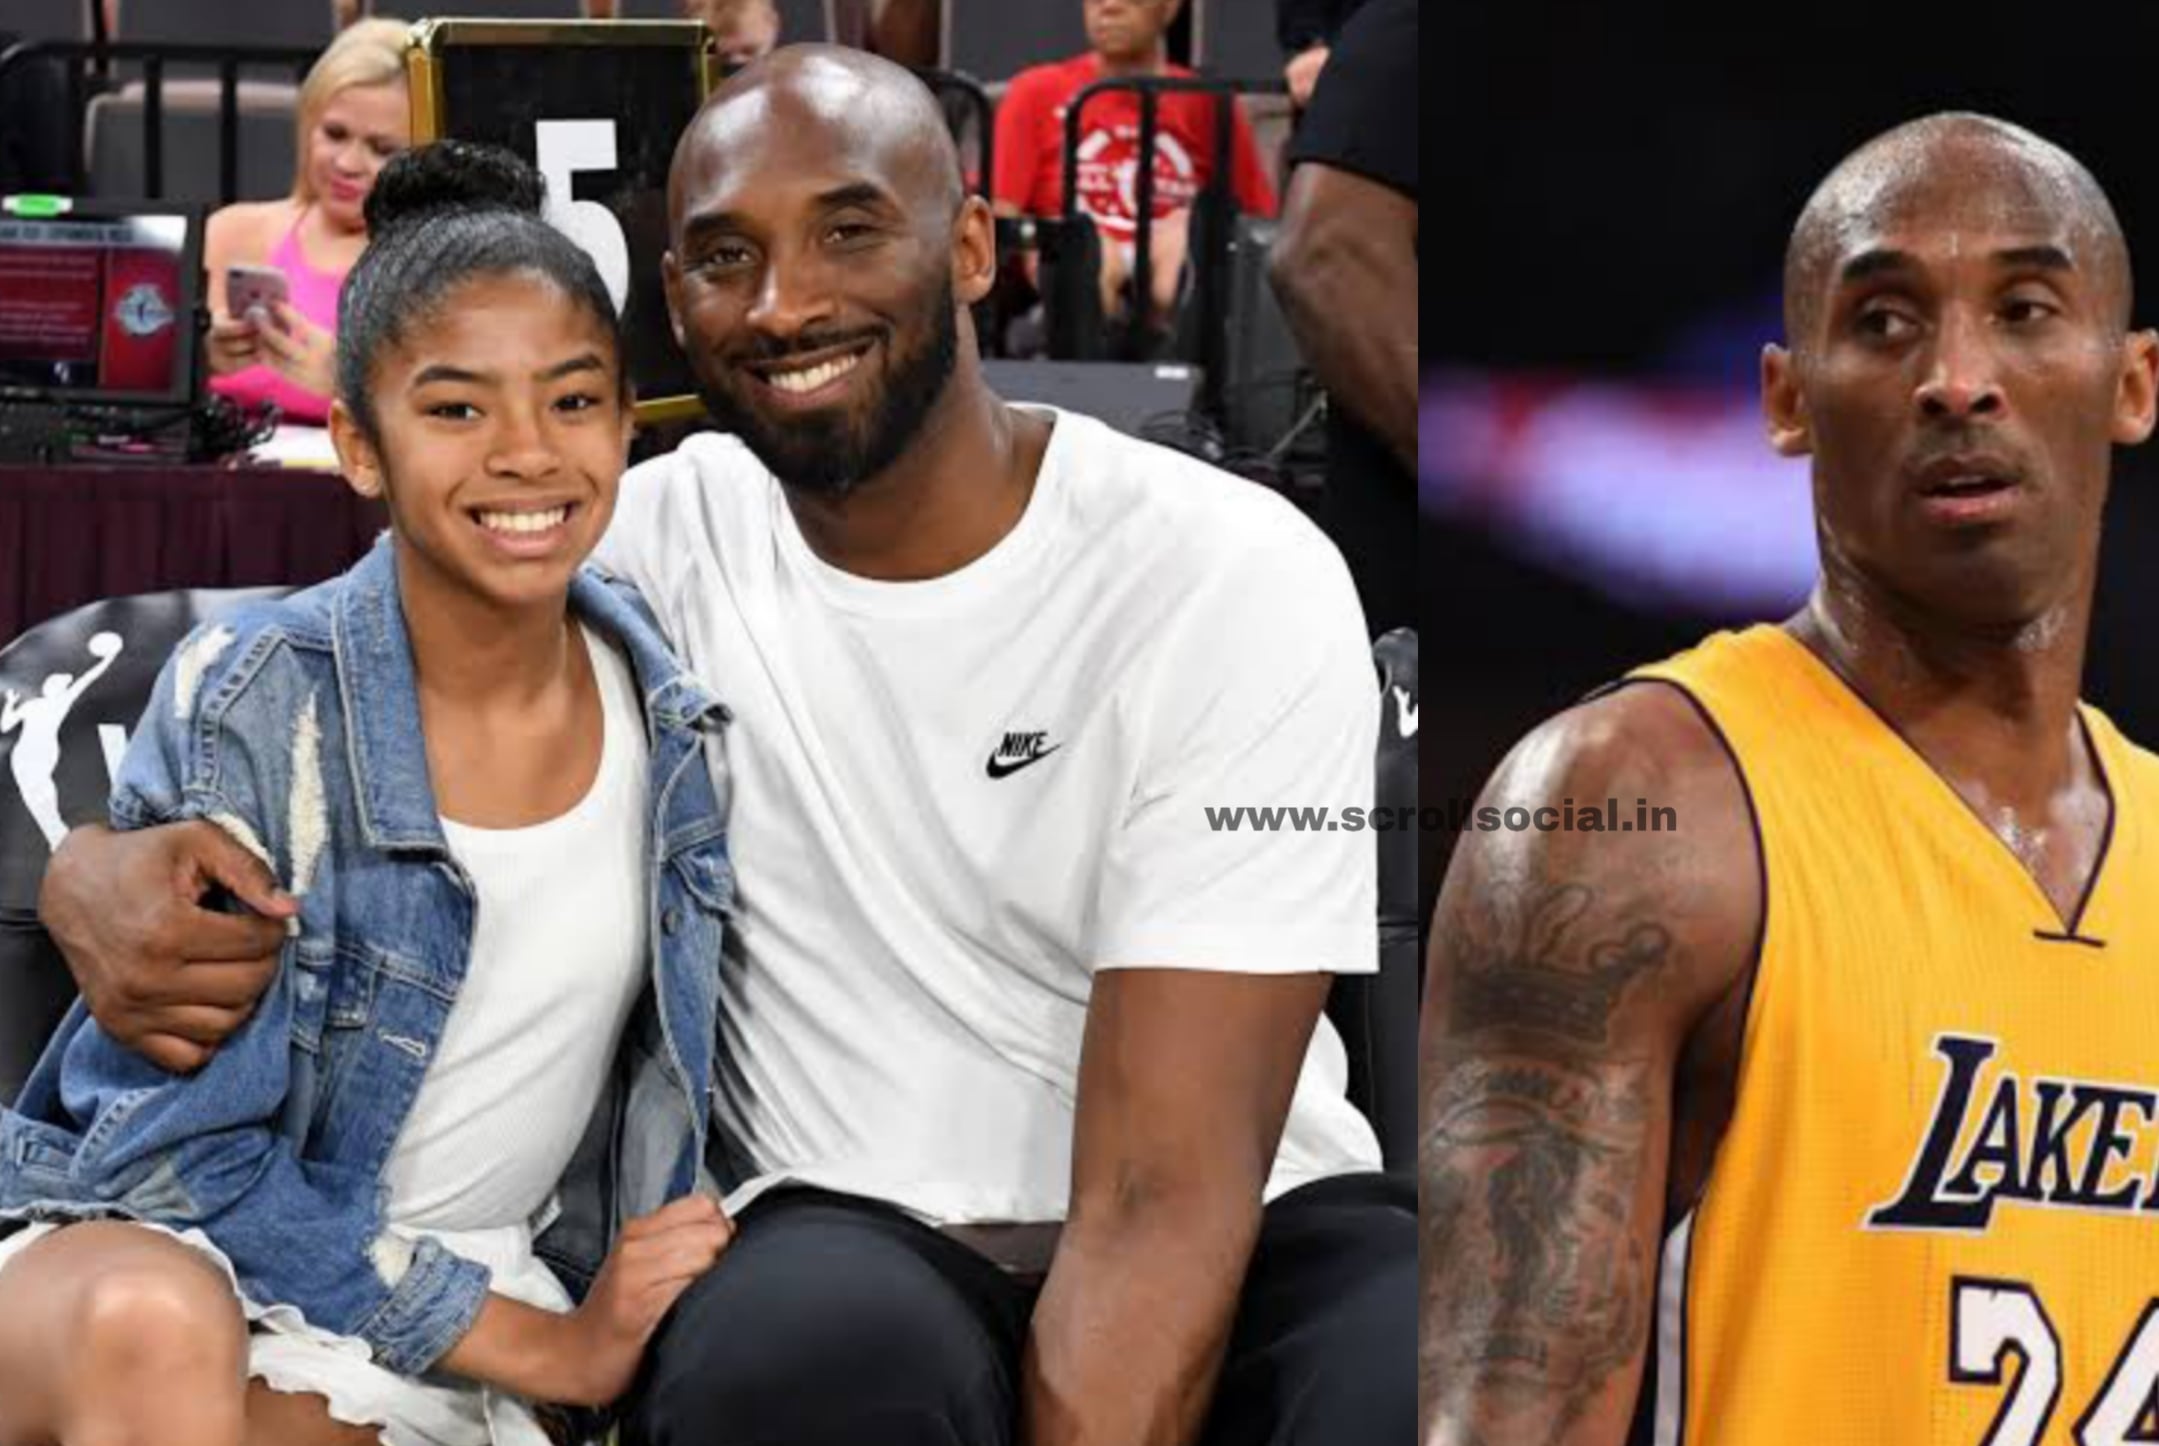 Kobe Bryant NBA player and his daughter Gianna Bryant Died in a Helicopter Crash Kobe Bryant age was just 41